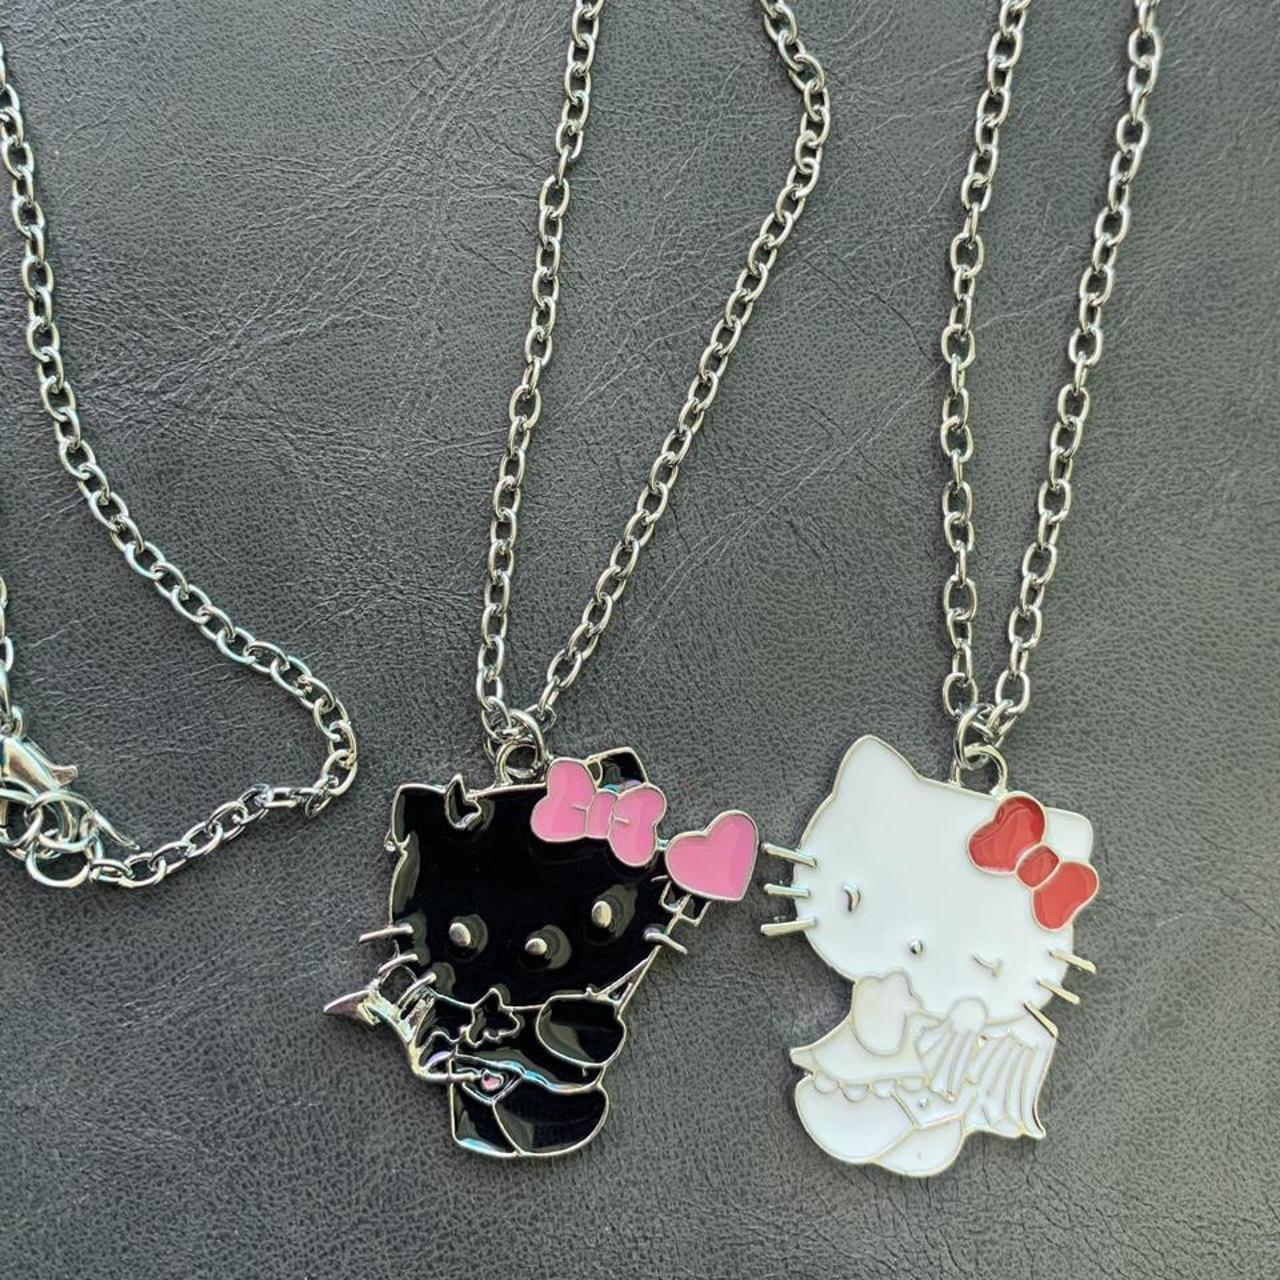 What Earrings Does One Wear With A Hello Kitty Necklace? - Privilege